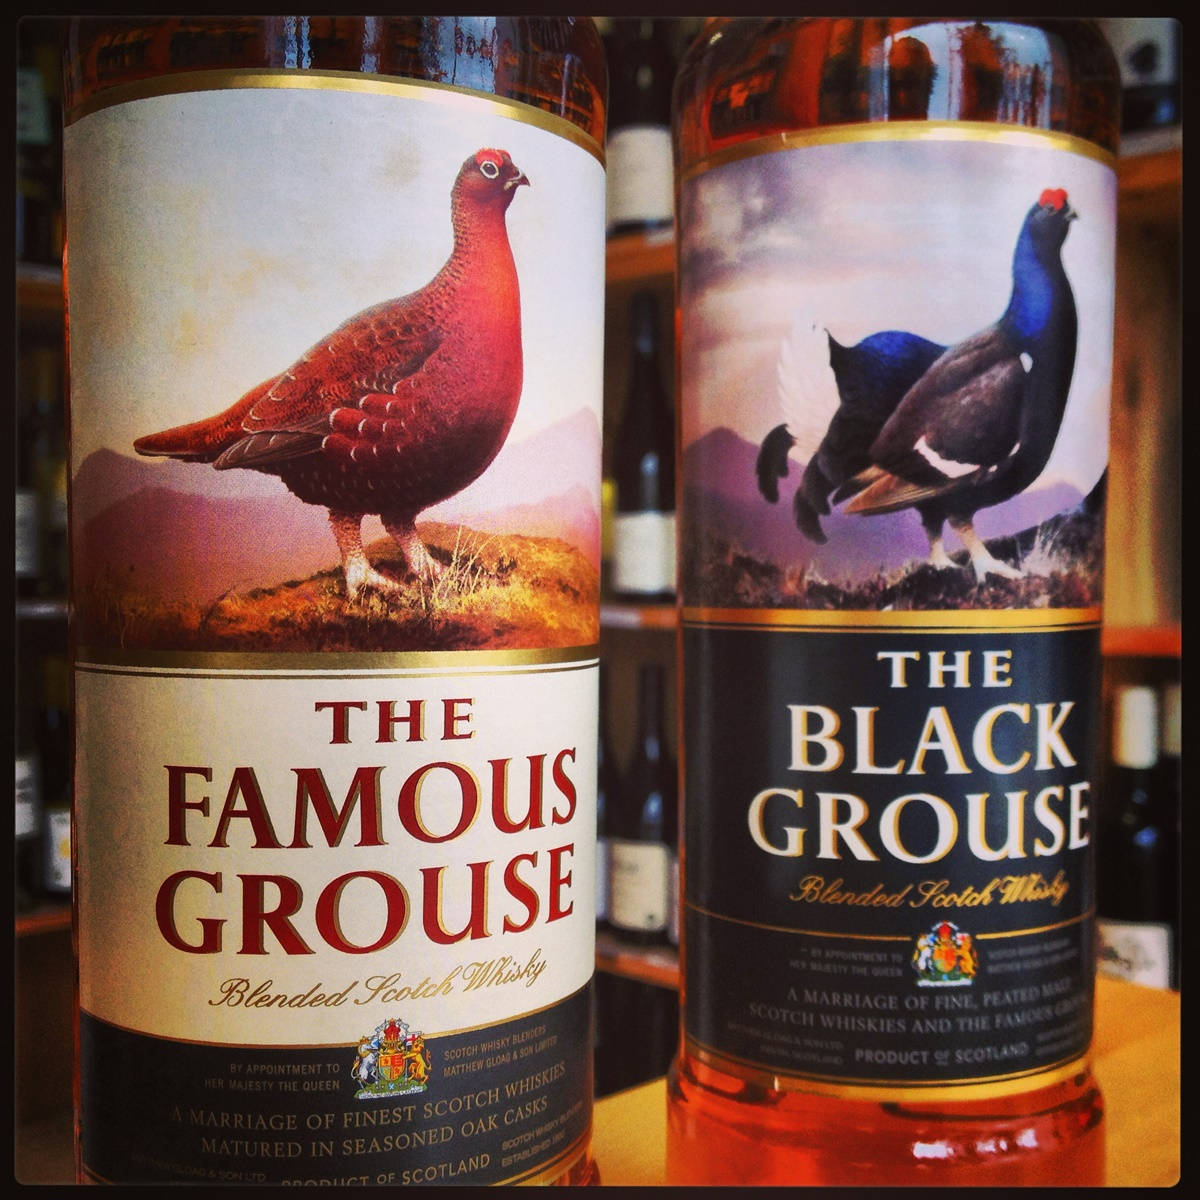 "Iconic Bottle of The Famous Grouse Black Grouse" Wallpaper